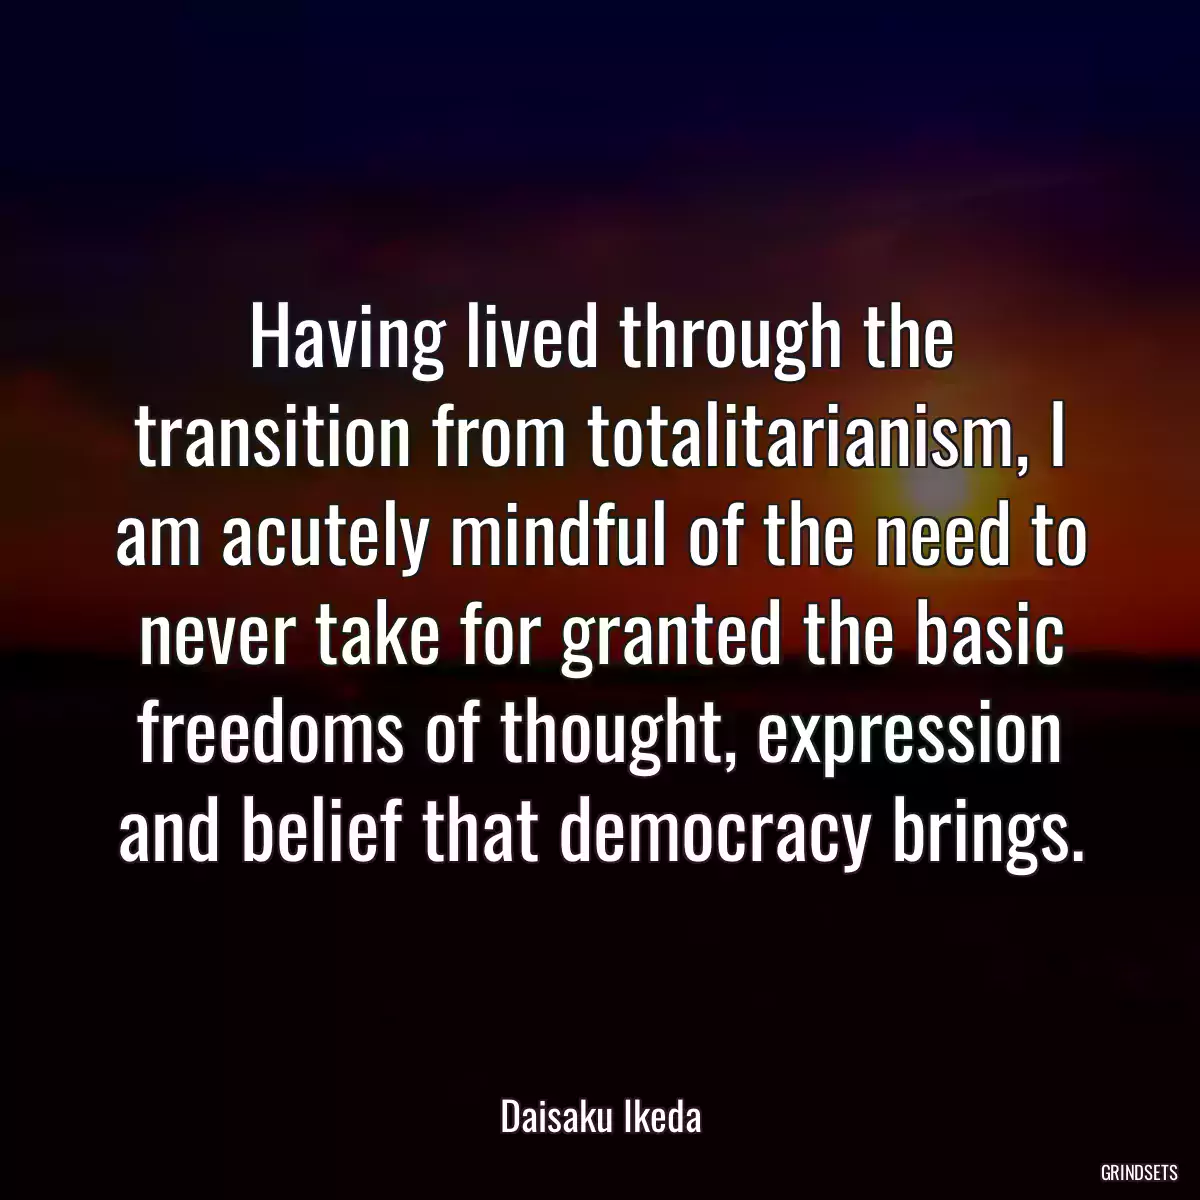 Having lived through the transition from totalitarianism, I am acutely mindful of the need to never take for granted the basic freedoms of thought, expression and belief that democracy brings.